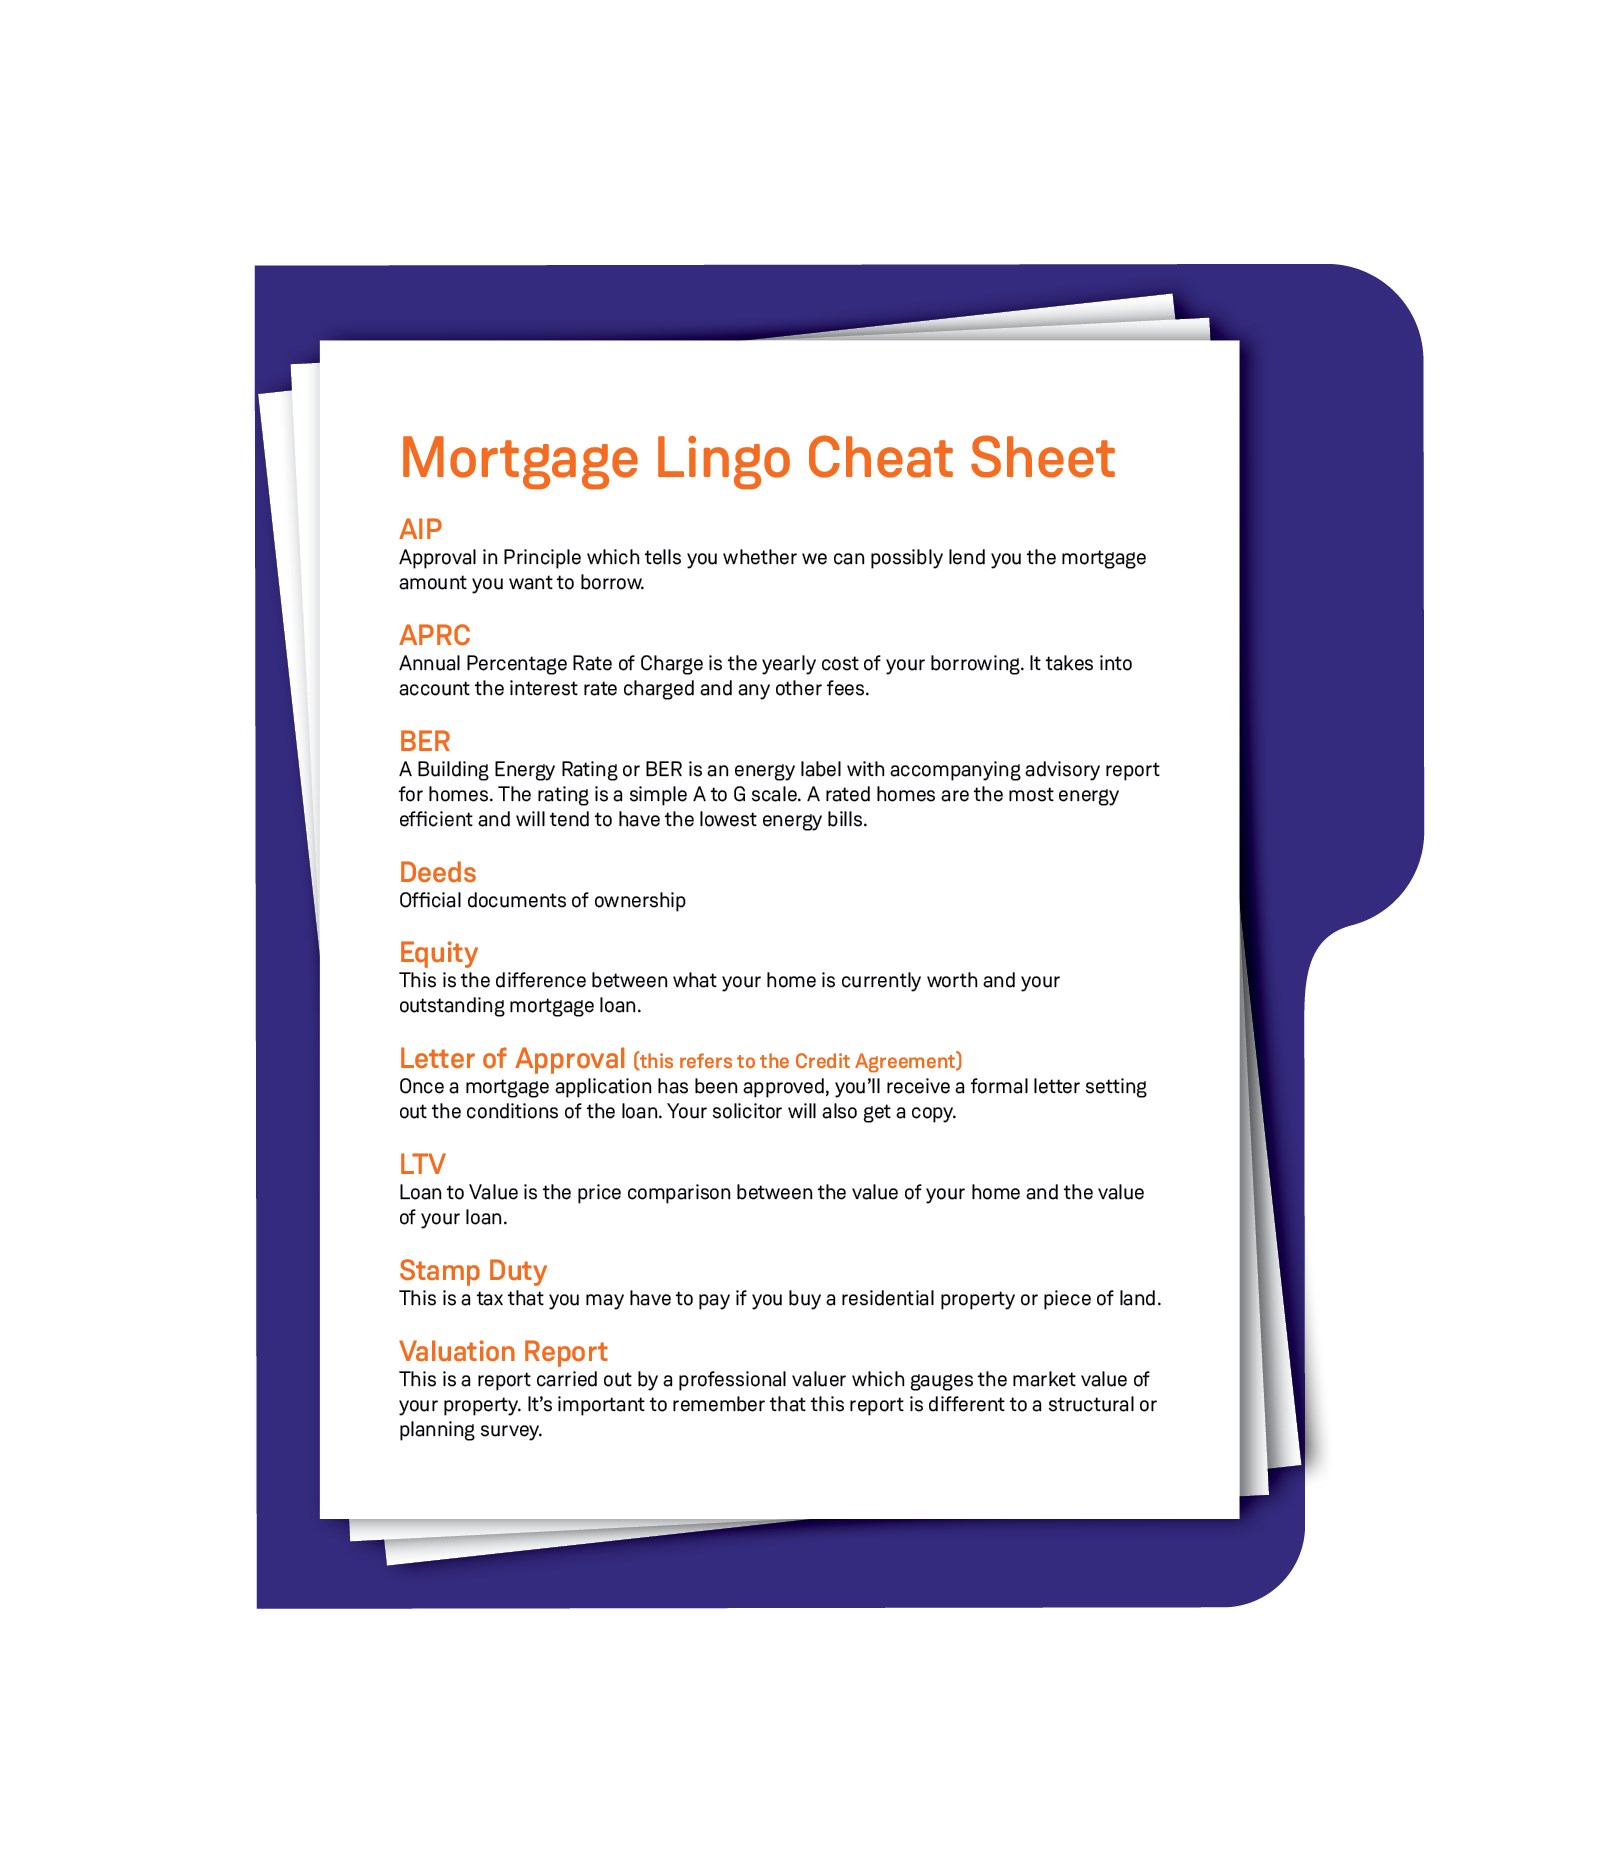  List of mortgage terms